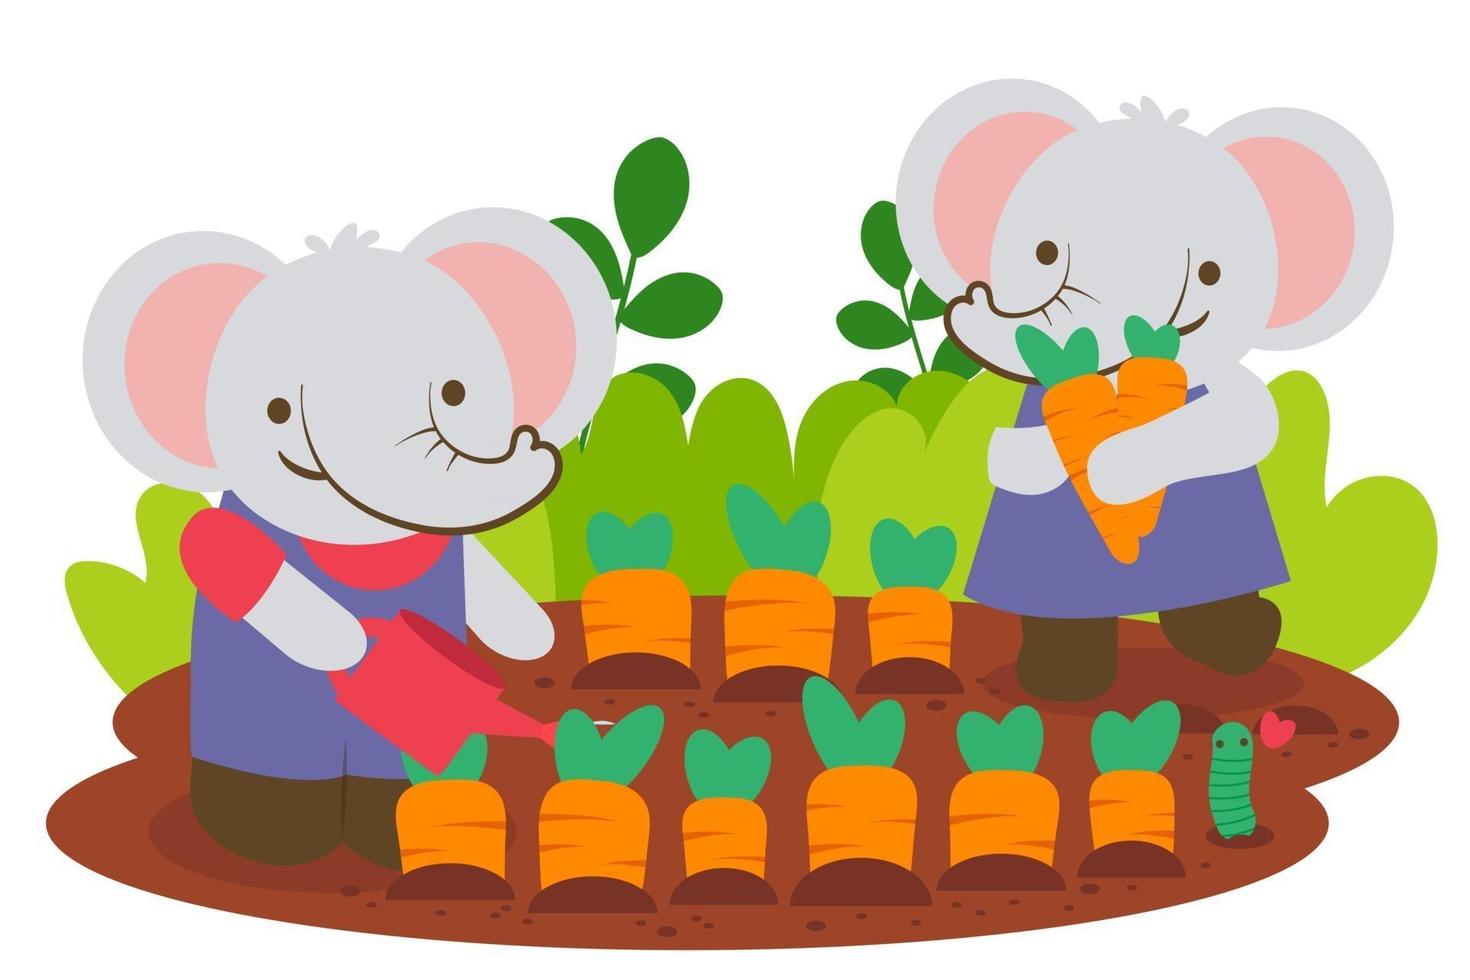 Elephant couple planting carrot together vector